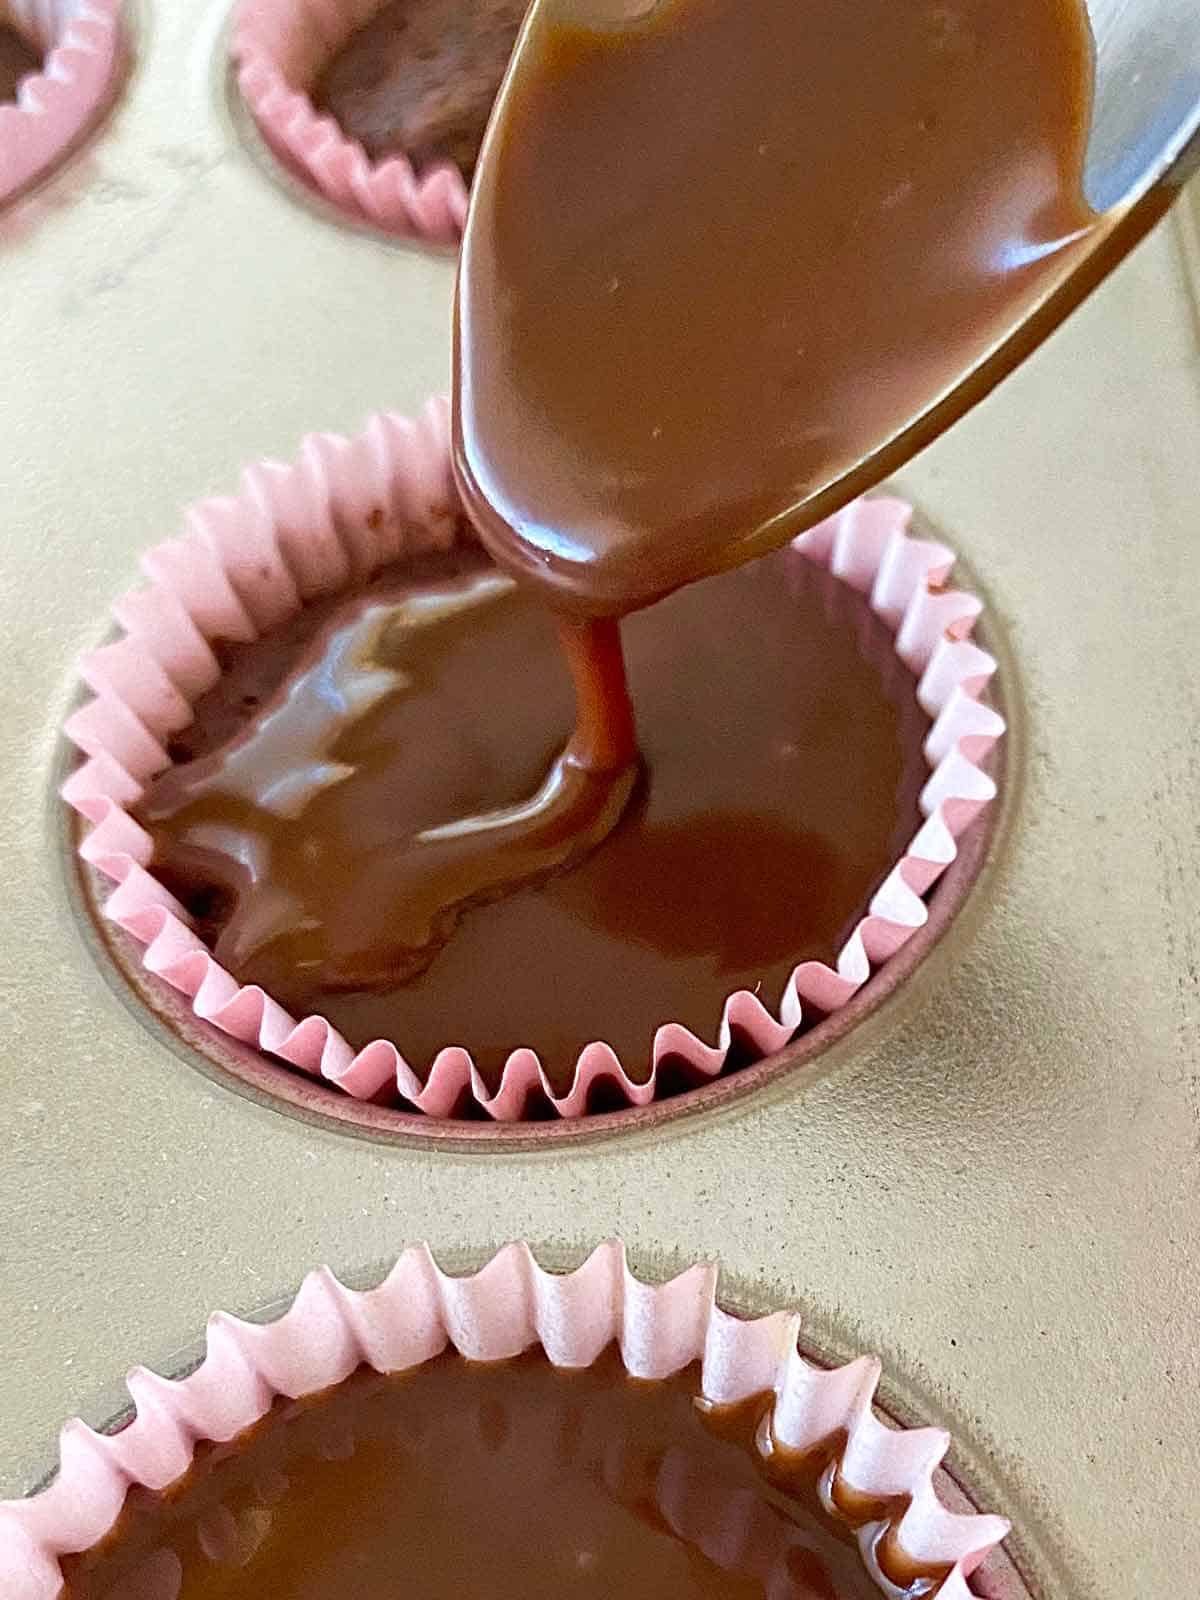 Using a spoon to pour chocolate ganache glaze on a small cake.